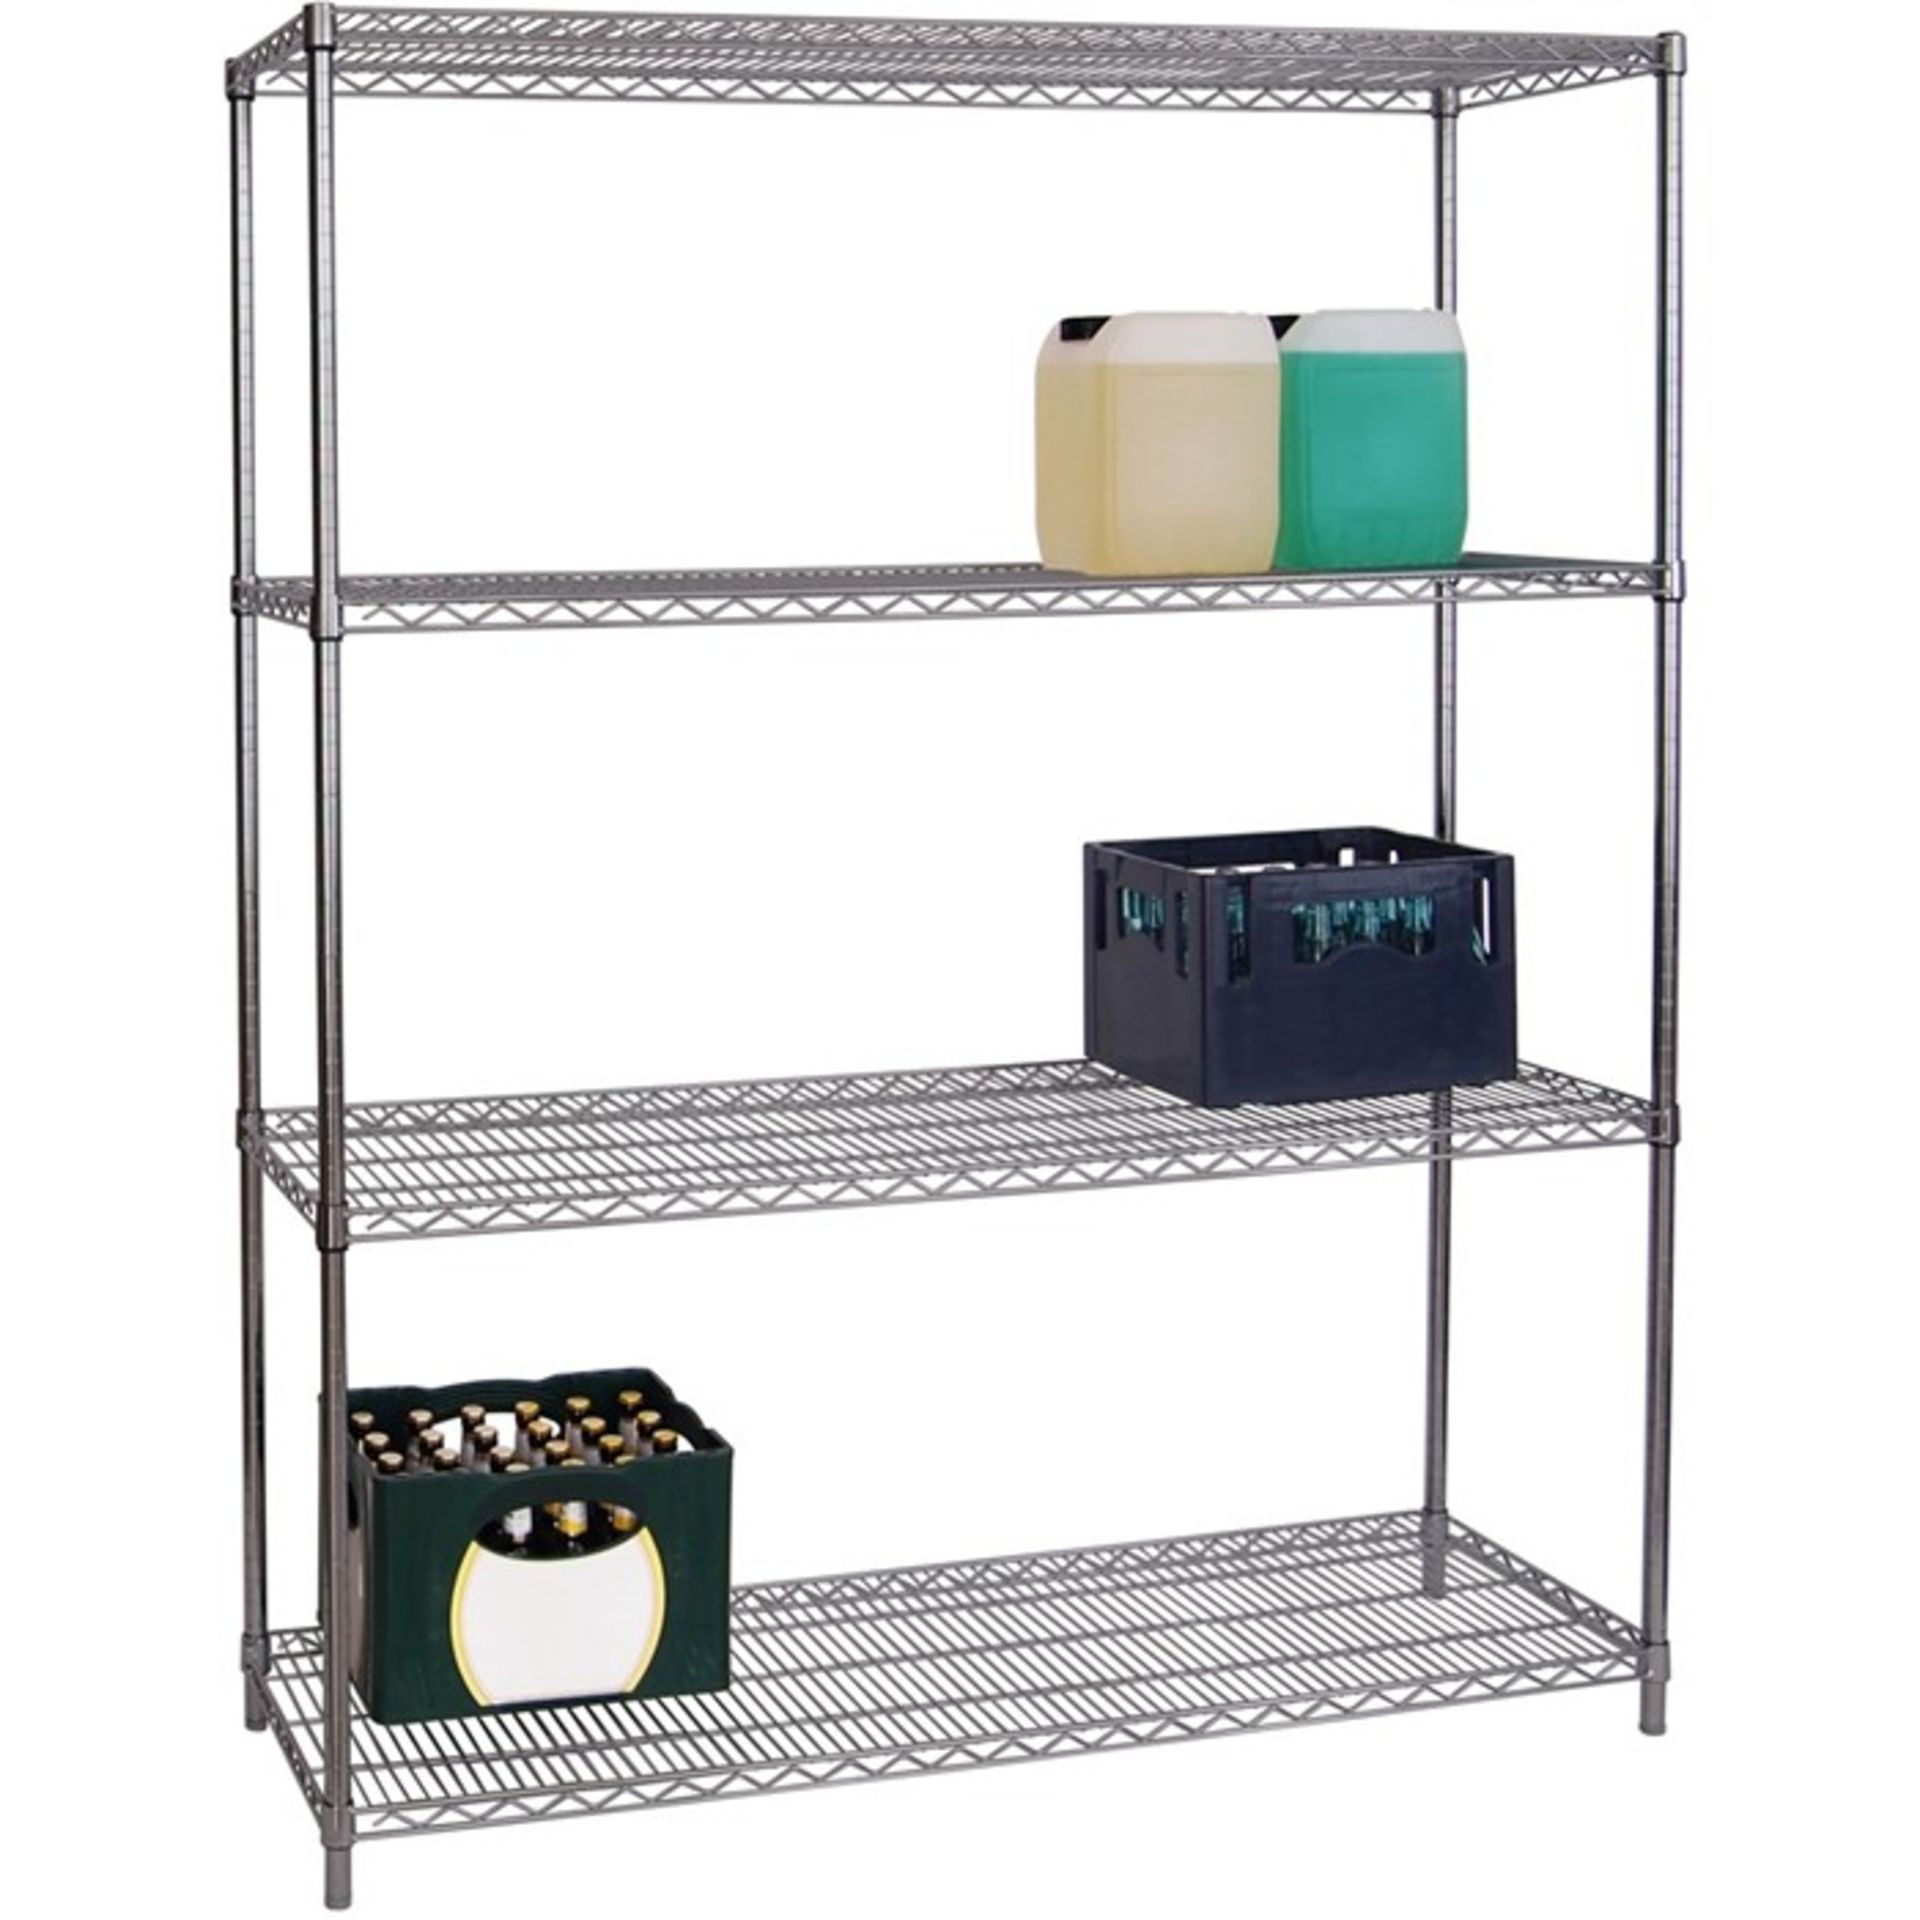 1 BOXED 4 TIER METAL STORAGE SHELVING UNIT IN BLACK AND WHITE / RRP £40.00 (PUBLIC VIEWING